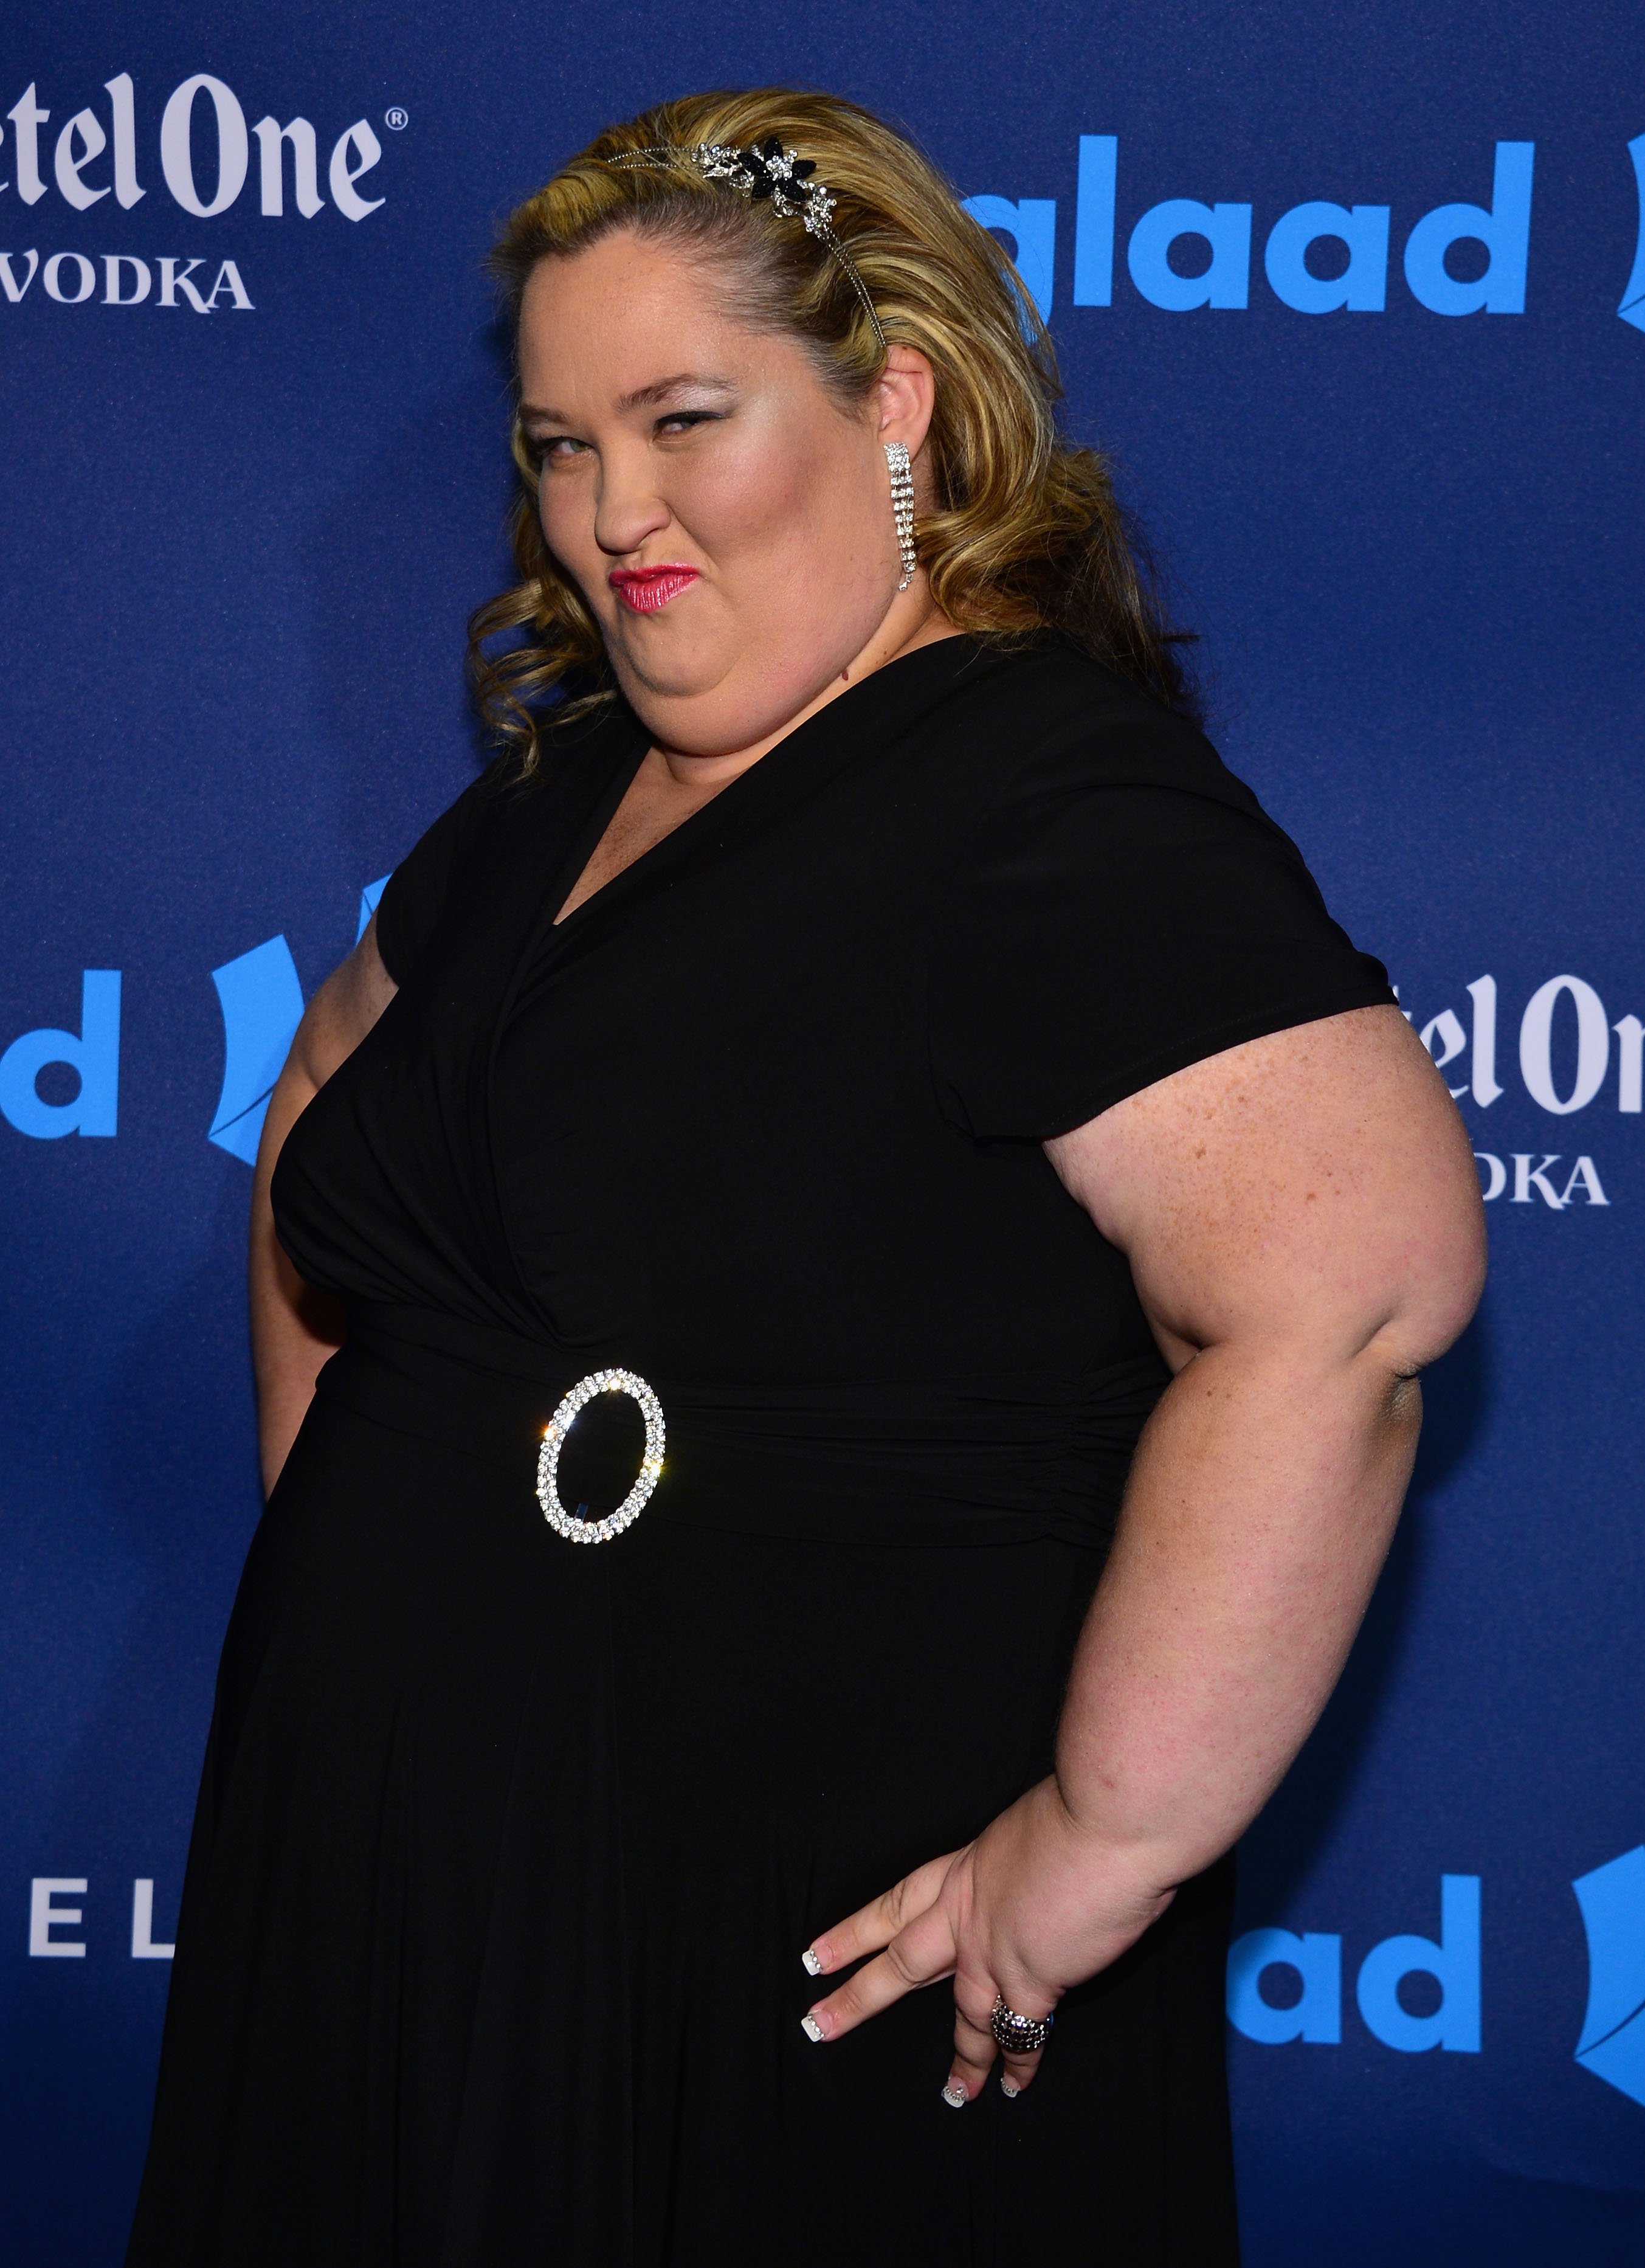 June "Mama" Shannon attends the GLAAD Media Awards in New York City on March 16, 2013 | Photo: Getty Images